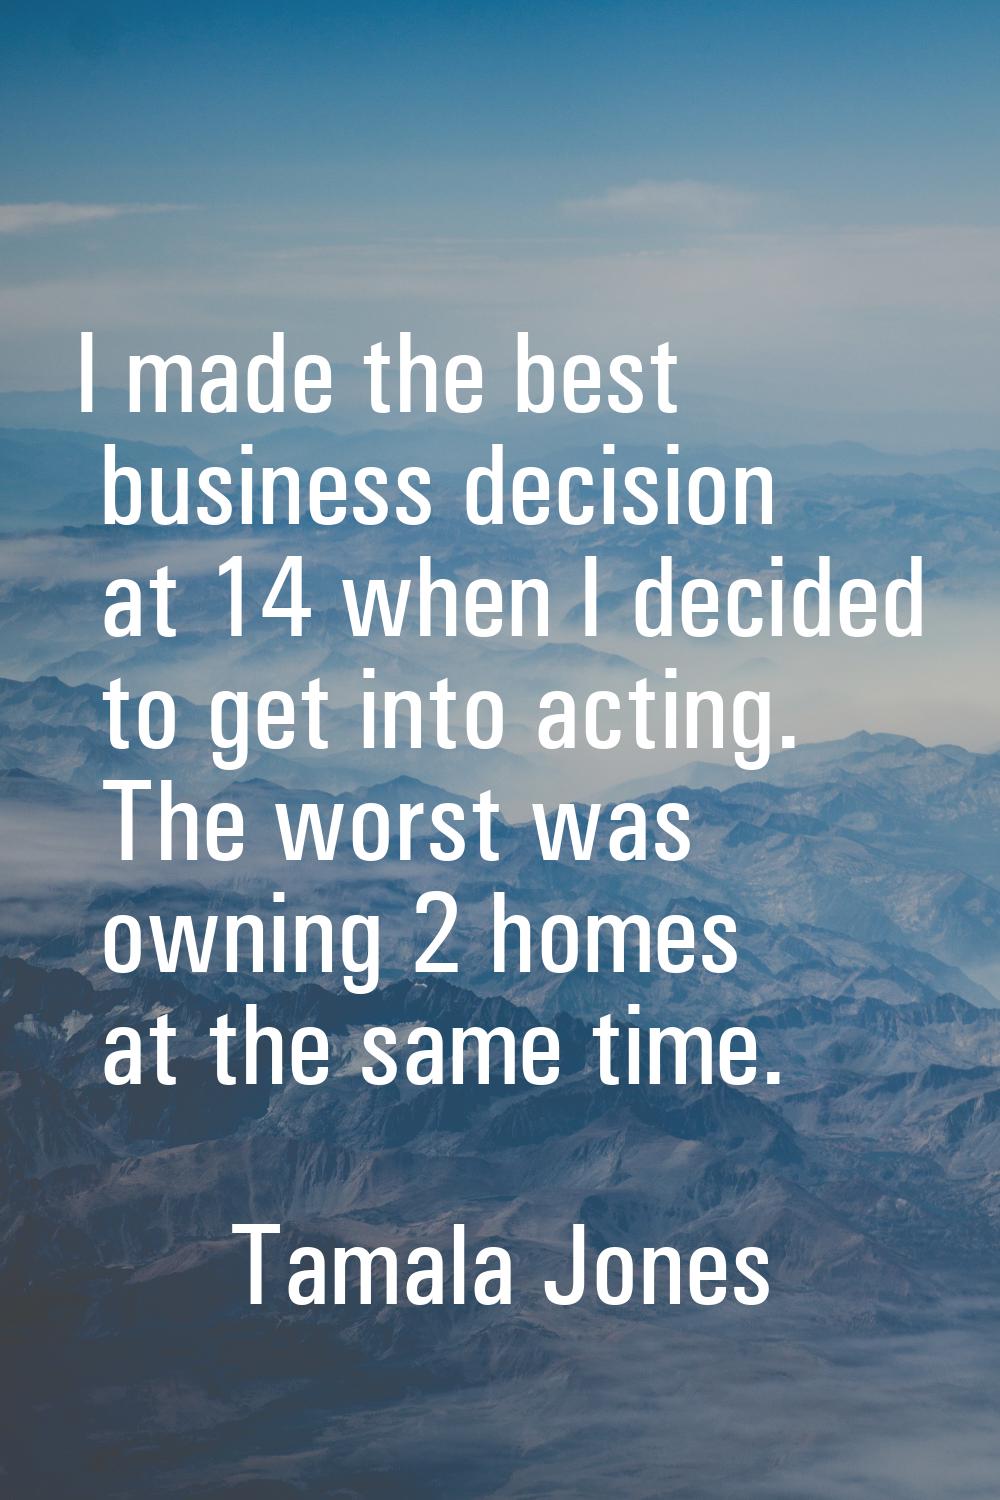 I made the best business decision at 14 when I decided to get into acting. The worst was owning 2 h